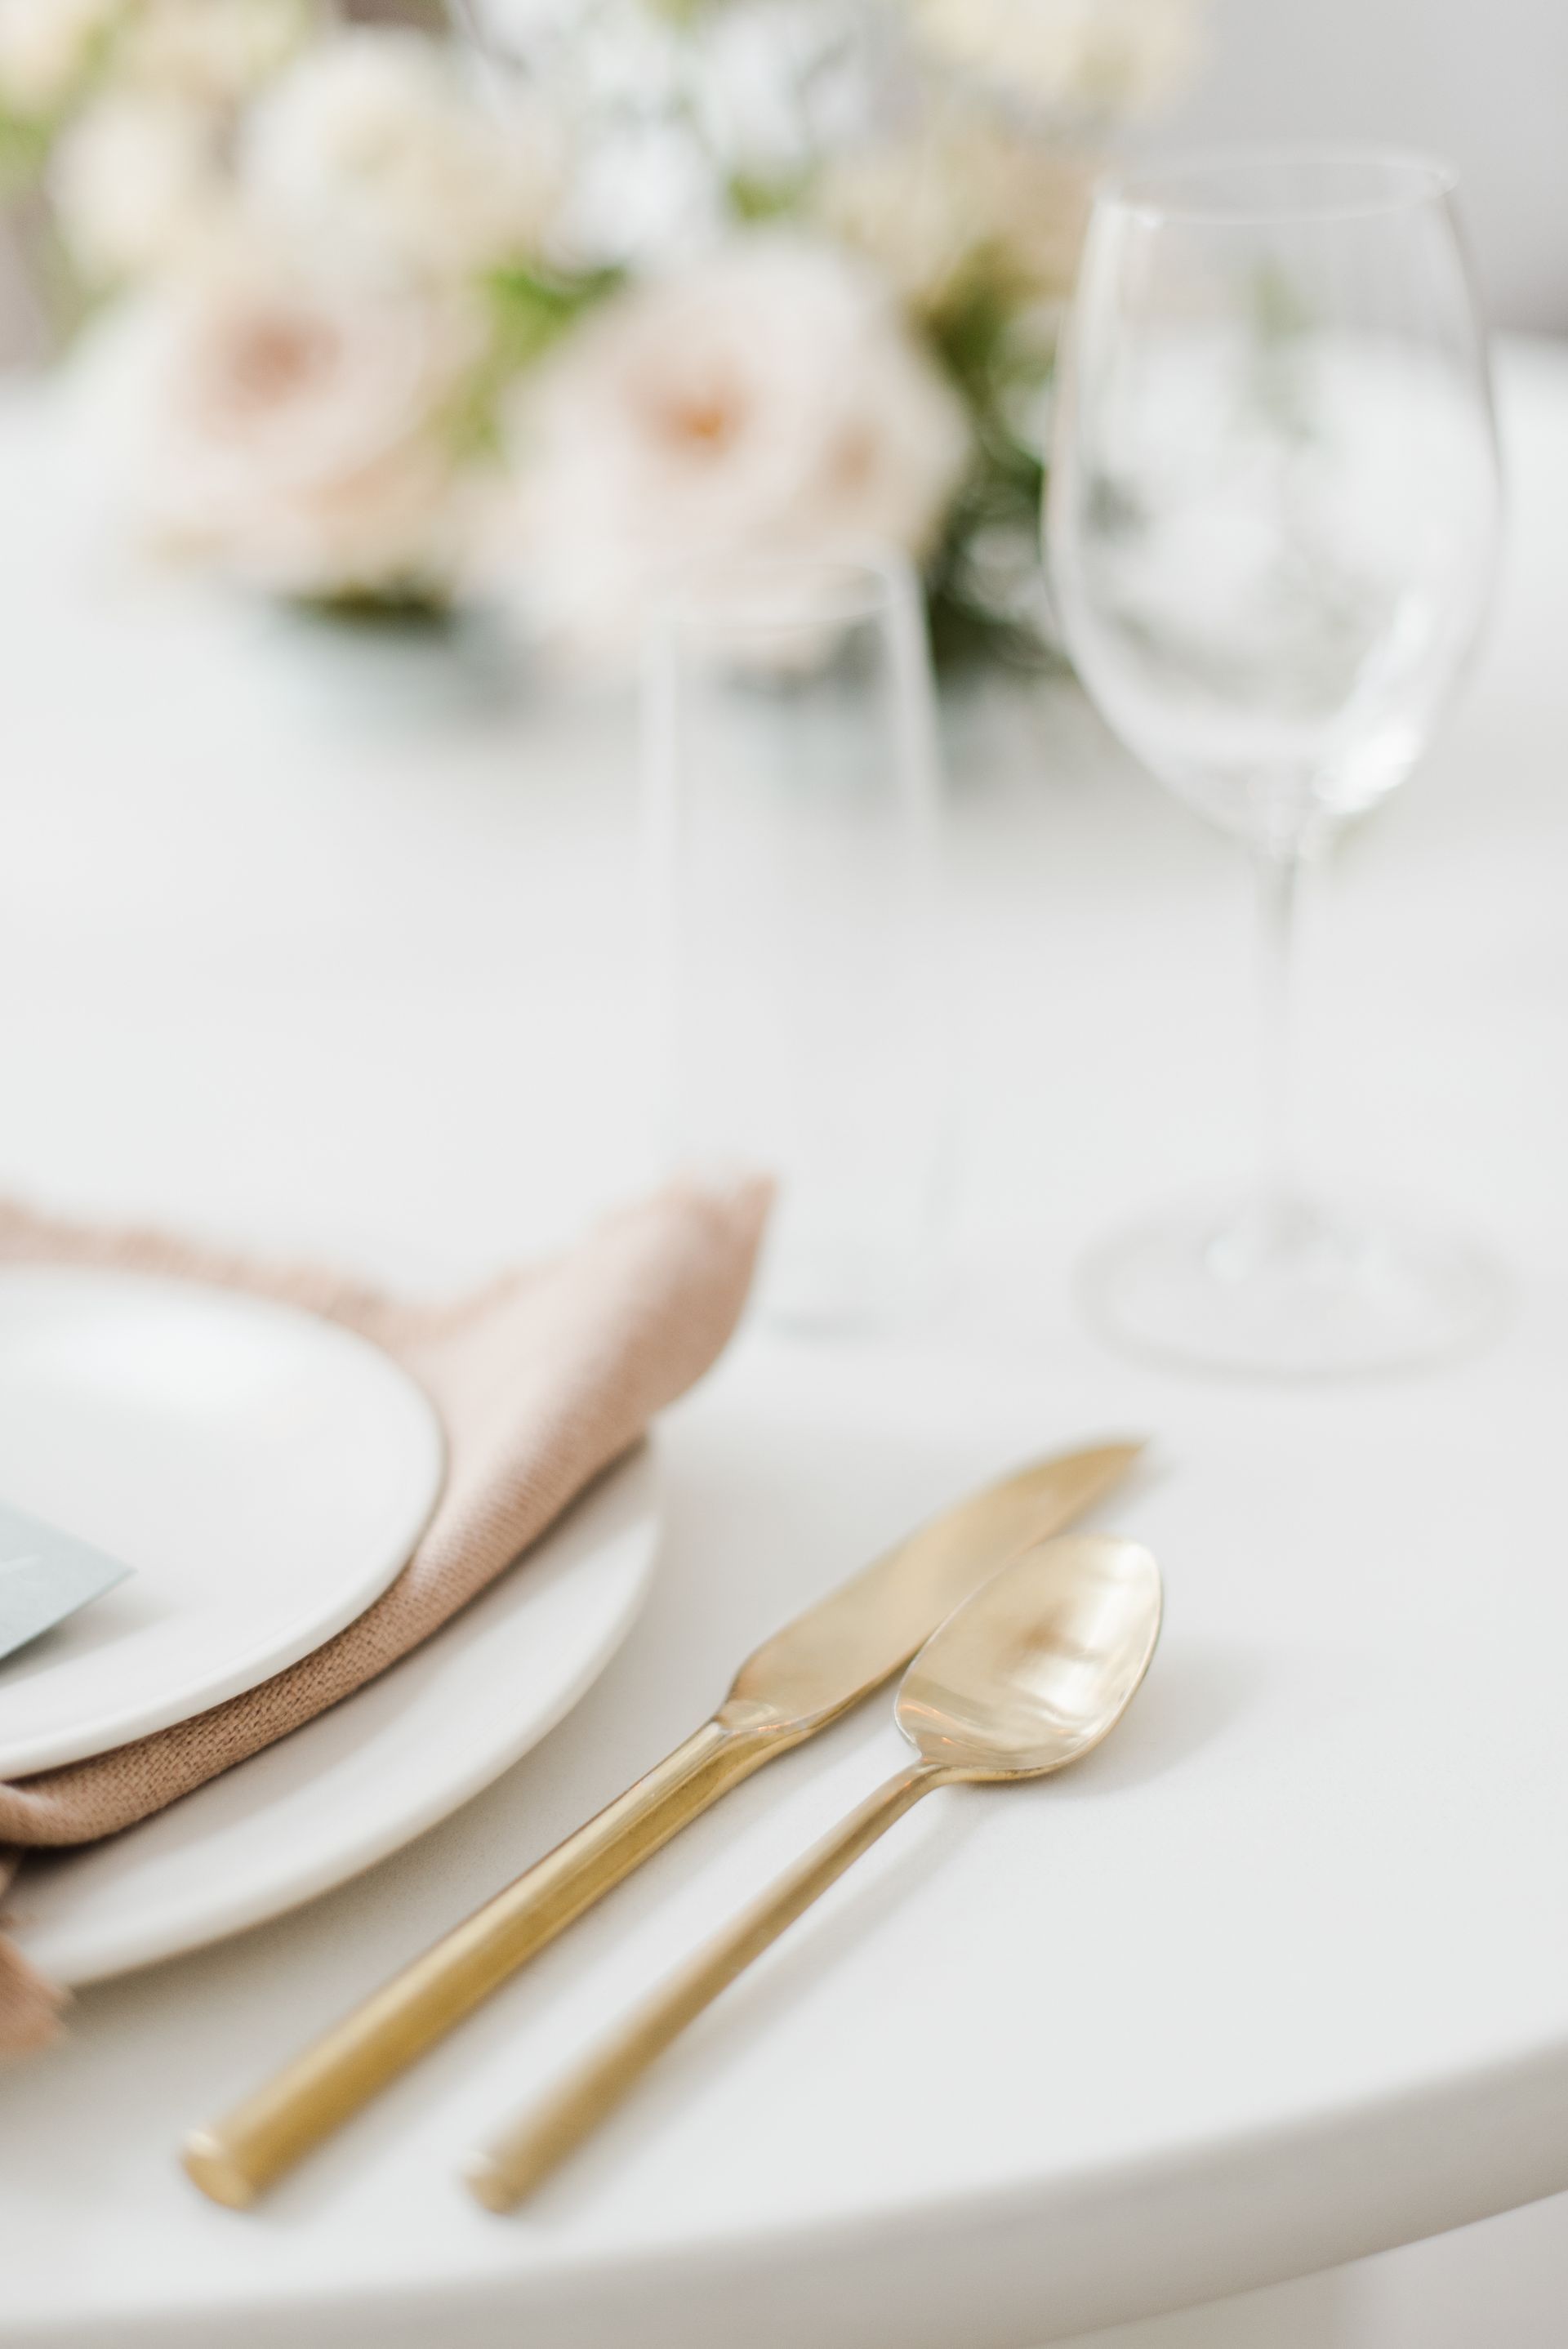 Gold cutlery and white plate on a table setting with a clear wine glass